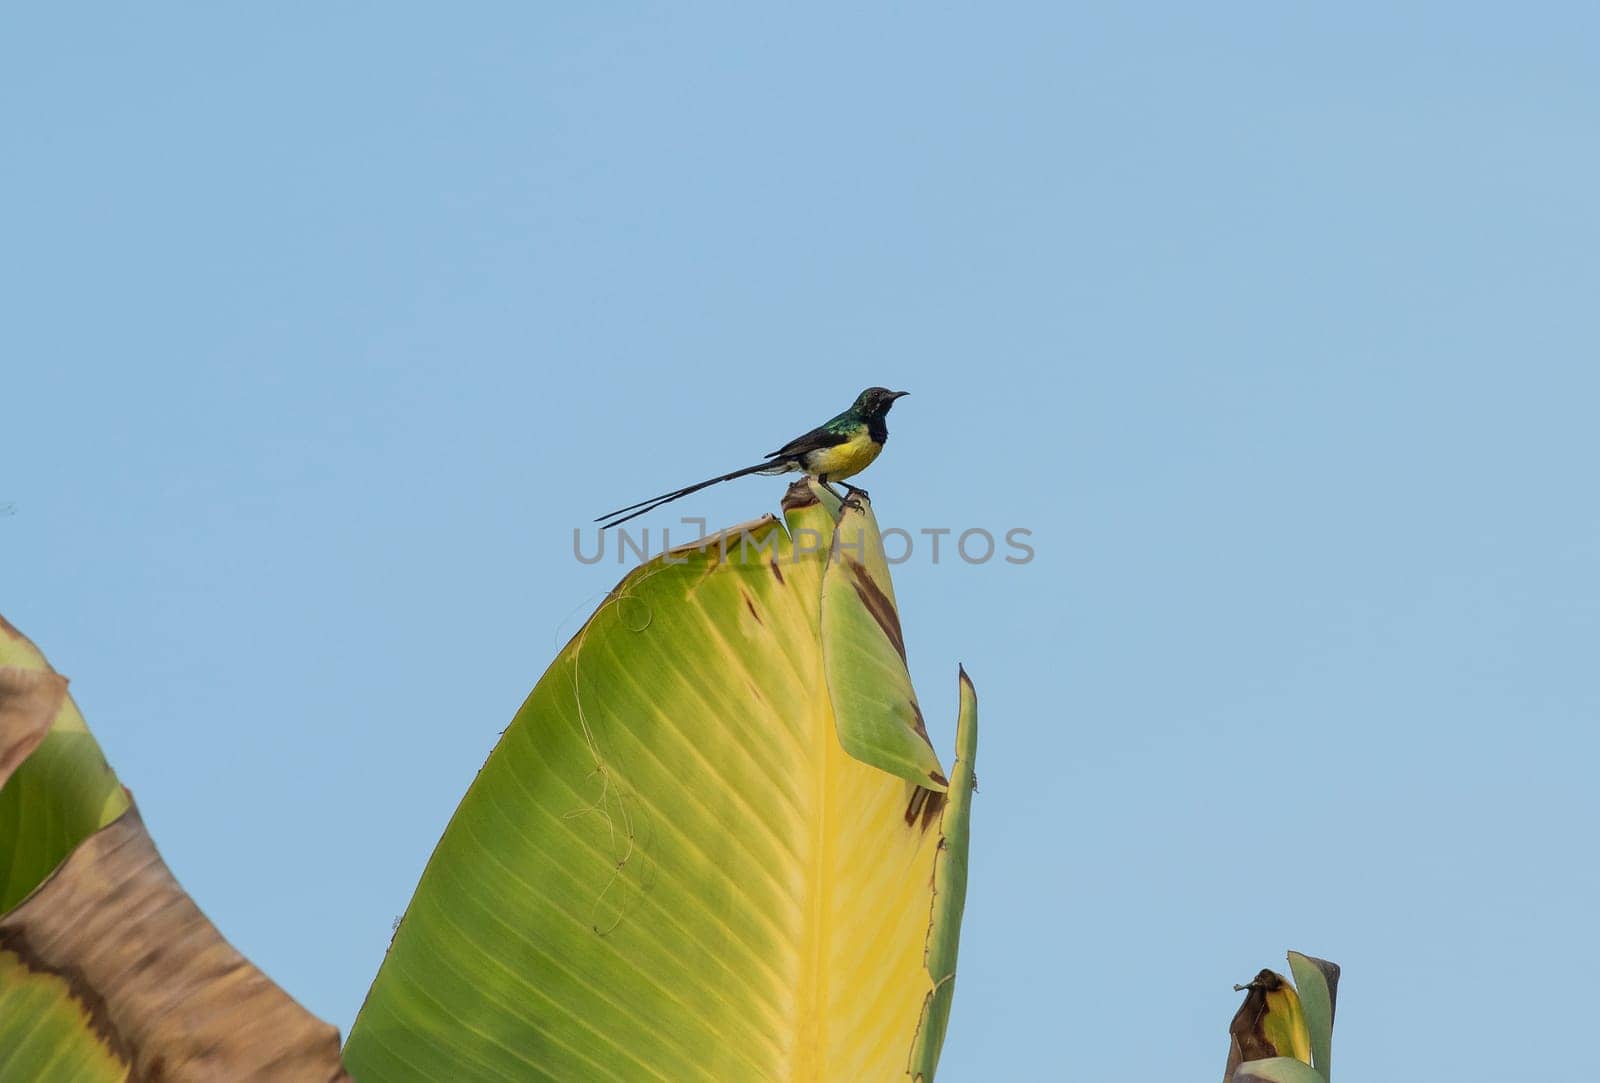 Nile Valley sunbird bird Hedydipna metallica perched on a large leaf against blue sky background